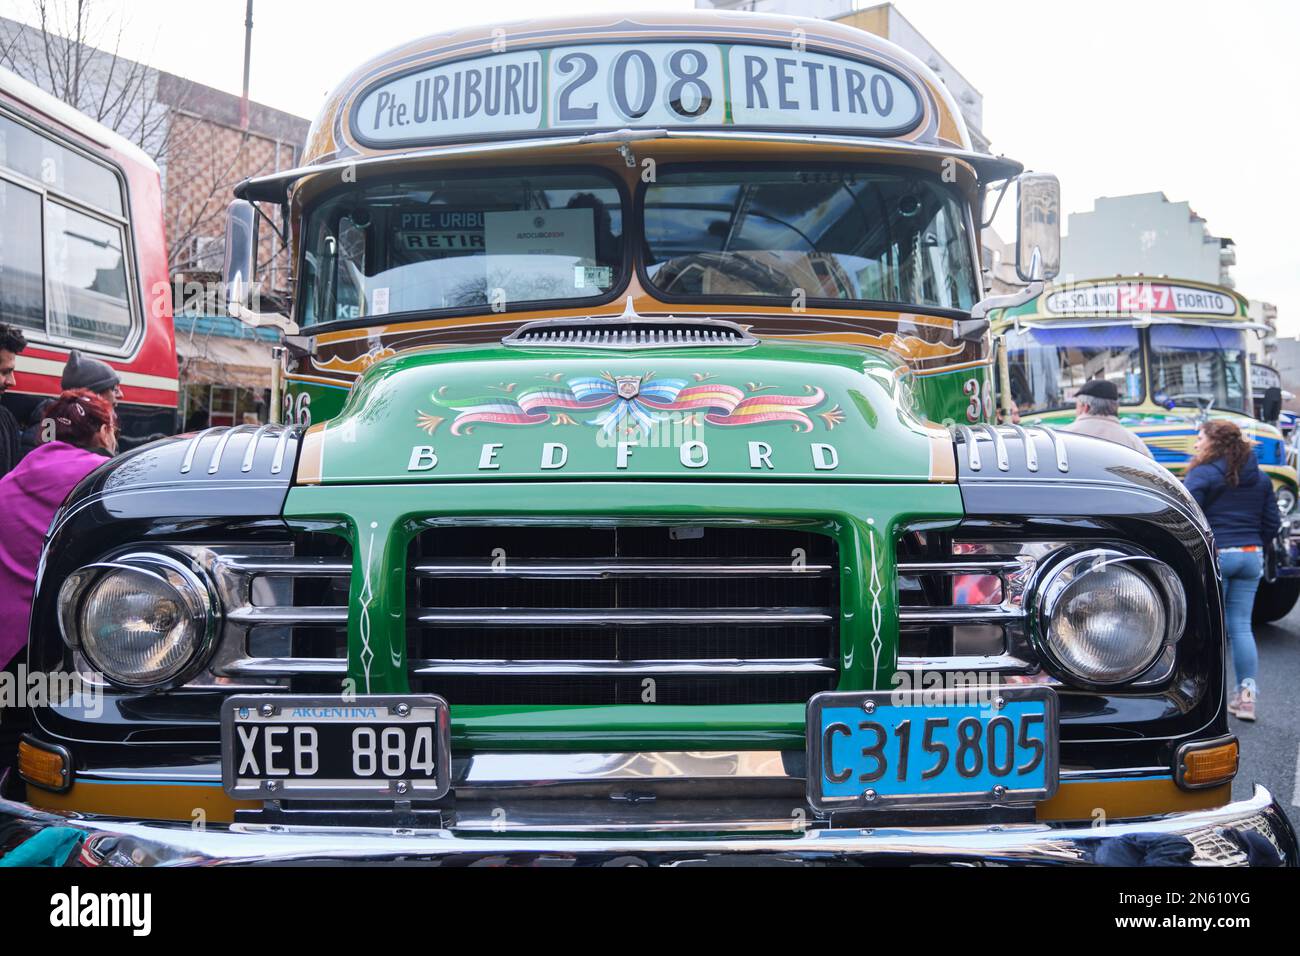 Buenos Aires, Argentina, June 20, 2022: Green Bedford Alcorta 1961 old vintage bus for public transport, line 208, painted with fileteado porteño styl Stock Photo